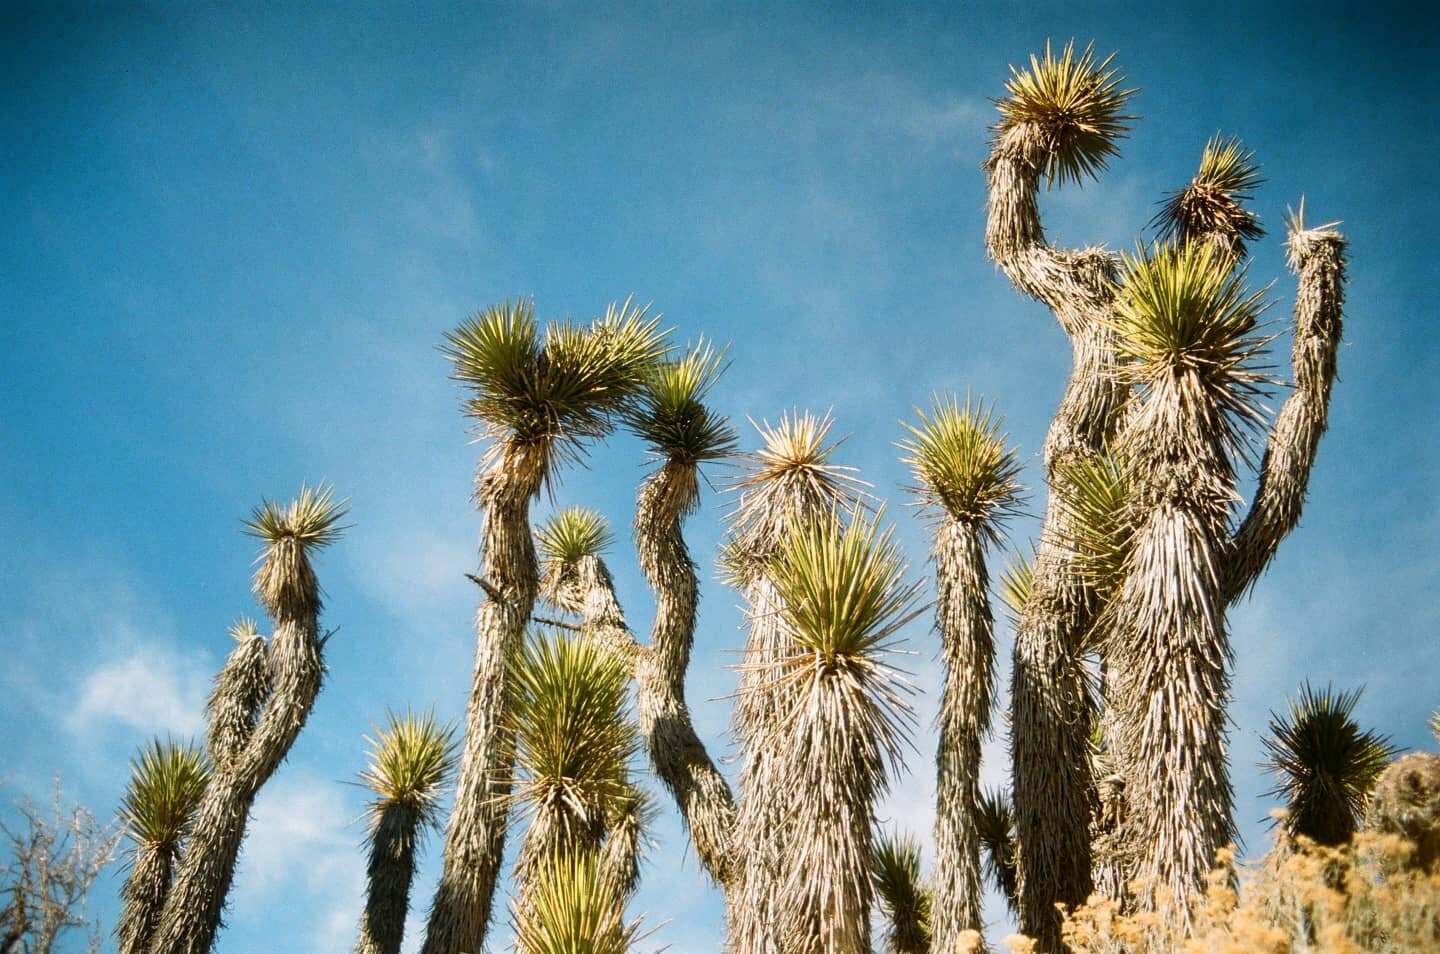 Yucca brevifolia, Joshua Tree, or  izote de desierto (desert dagger) 🏜️
👁️Kodak Porta 400 //Nikon N6006
The Joshua Tree grows in arid environments mostly confined to the Mojave Desert between 1,300/5,900 feet.  Ecological research predicts that the